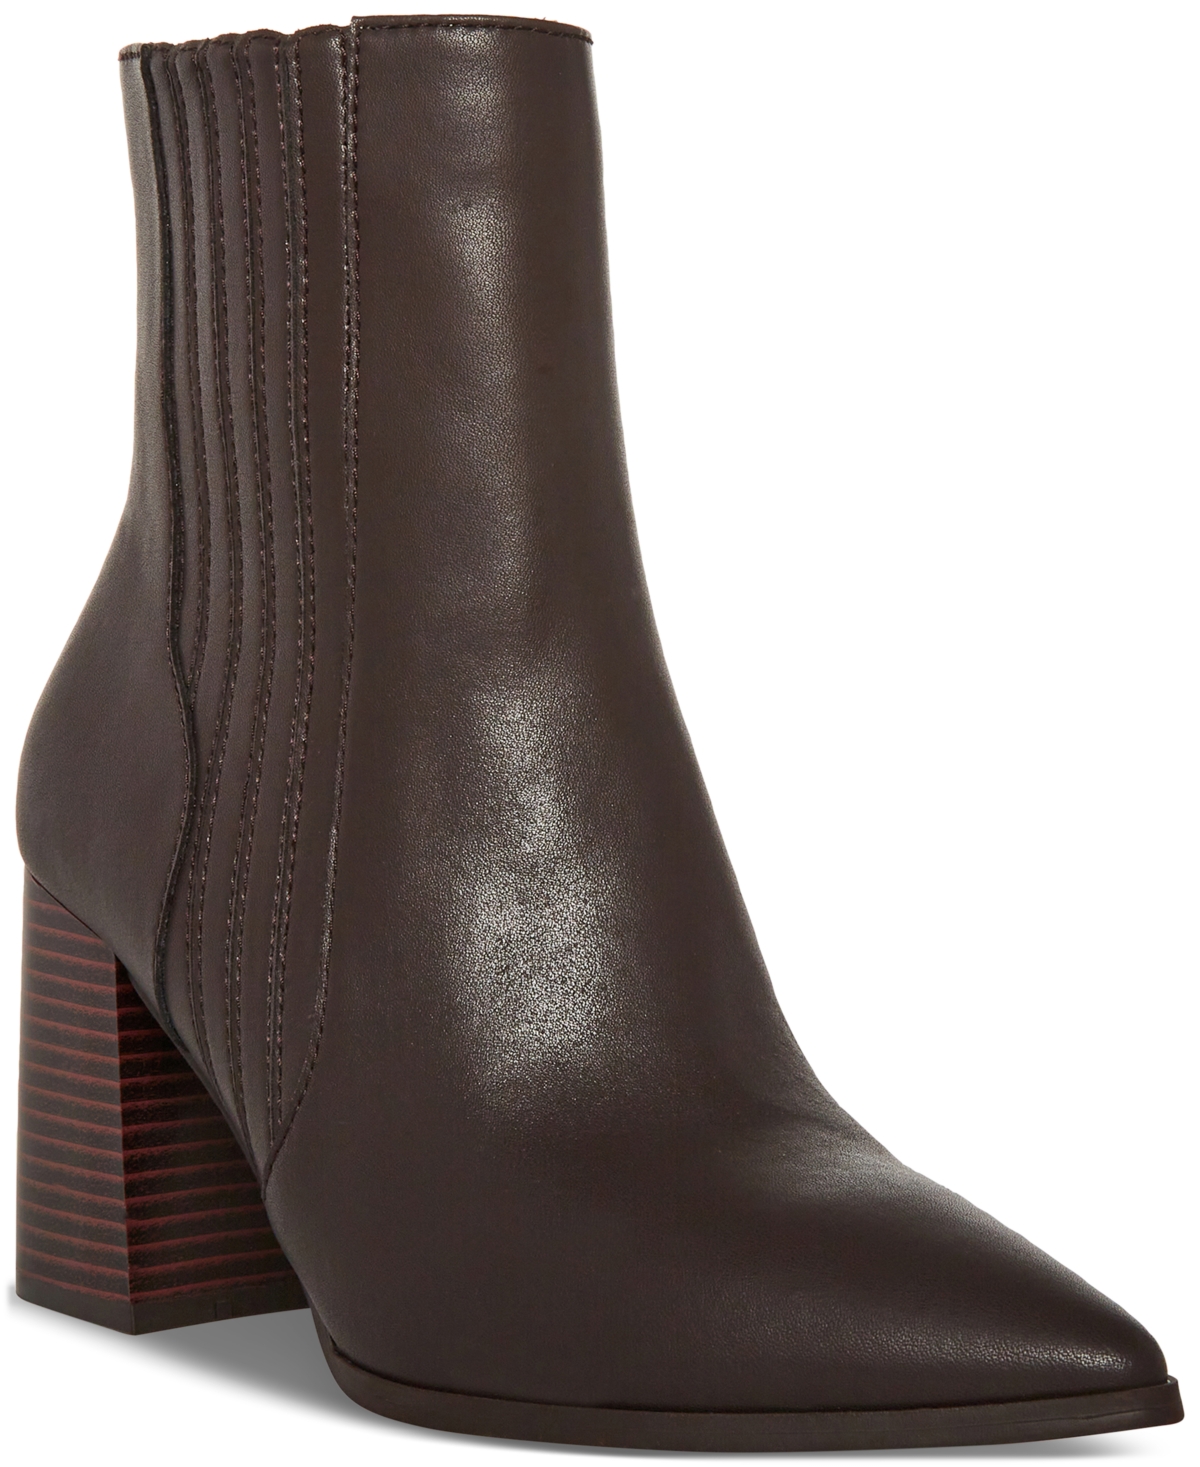 Aqua College Women's Waterproof Iconic Pointed-toe Dress Booties In Chocolate Leather